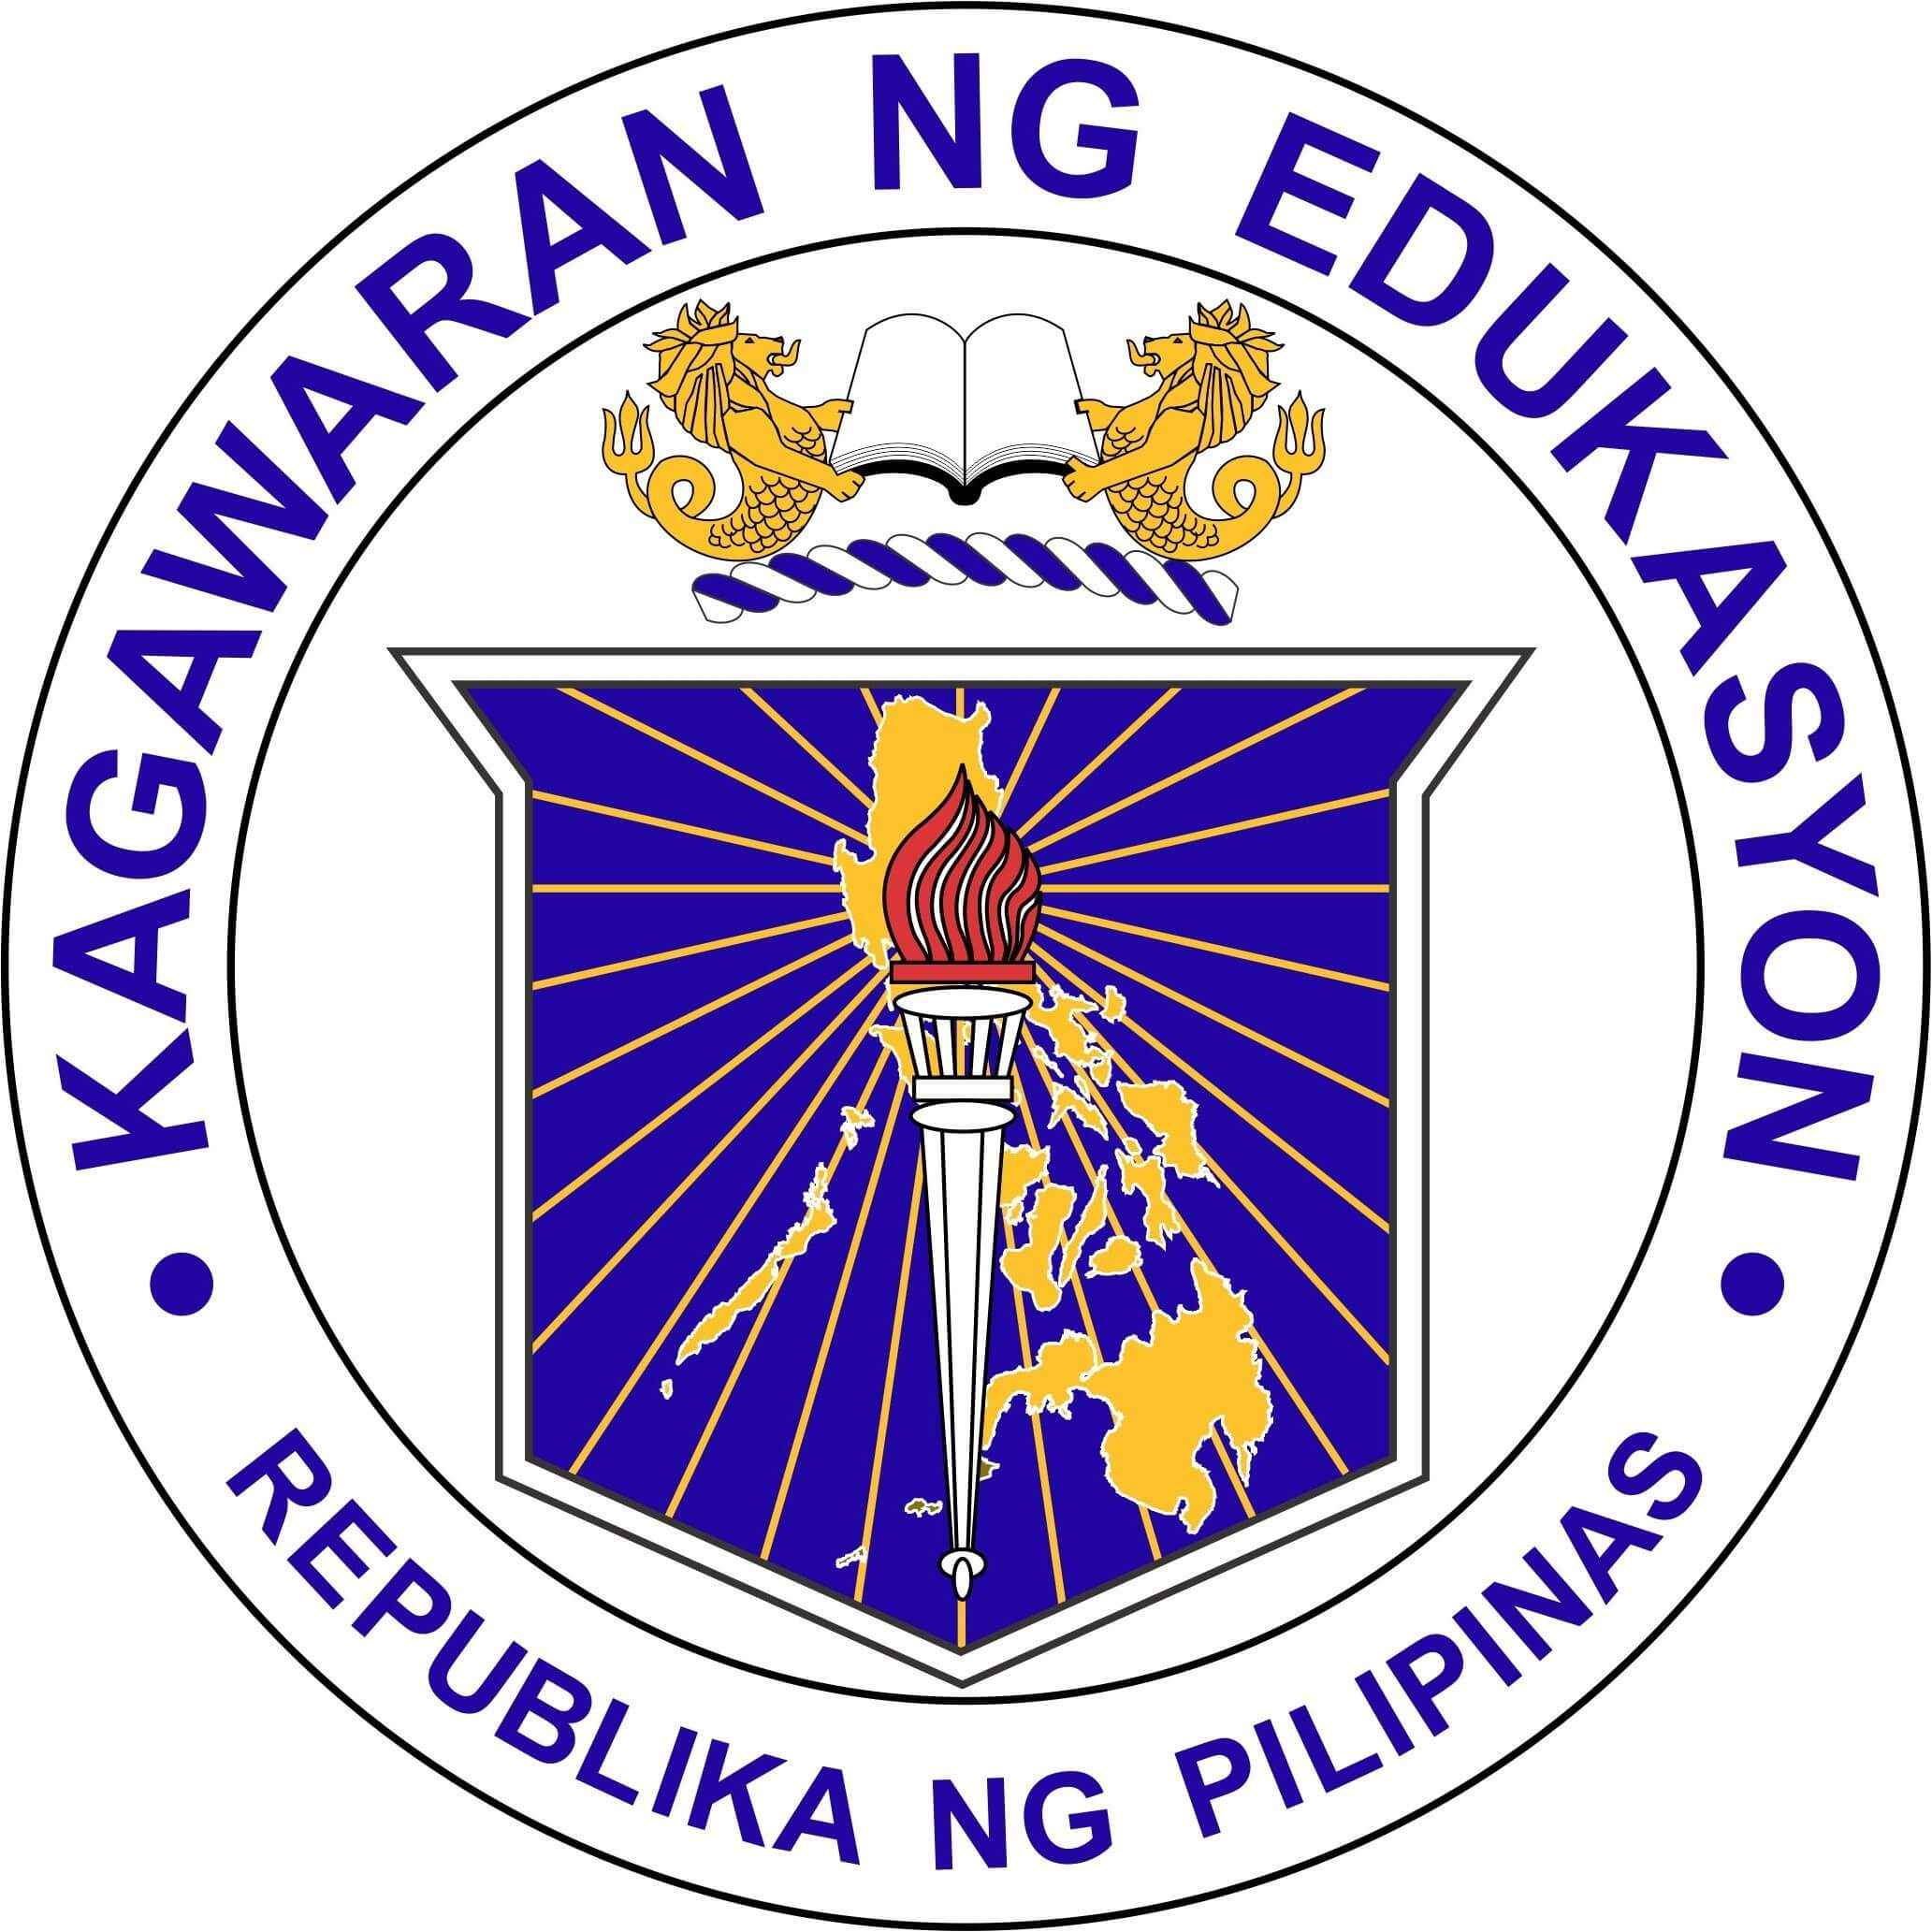 deped logo department of education philippines deped gov ph free vector download